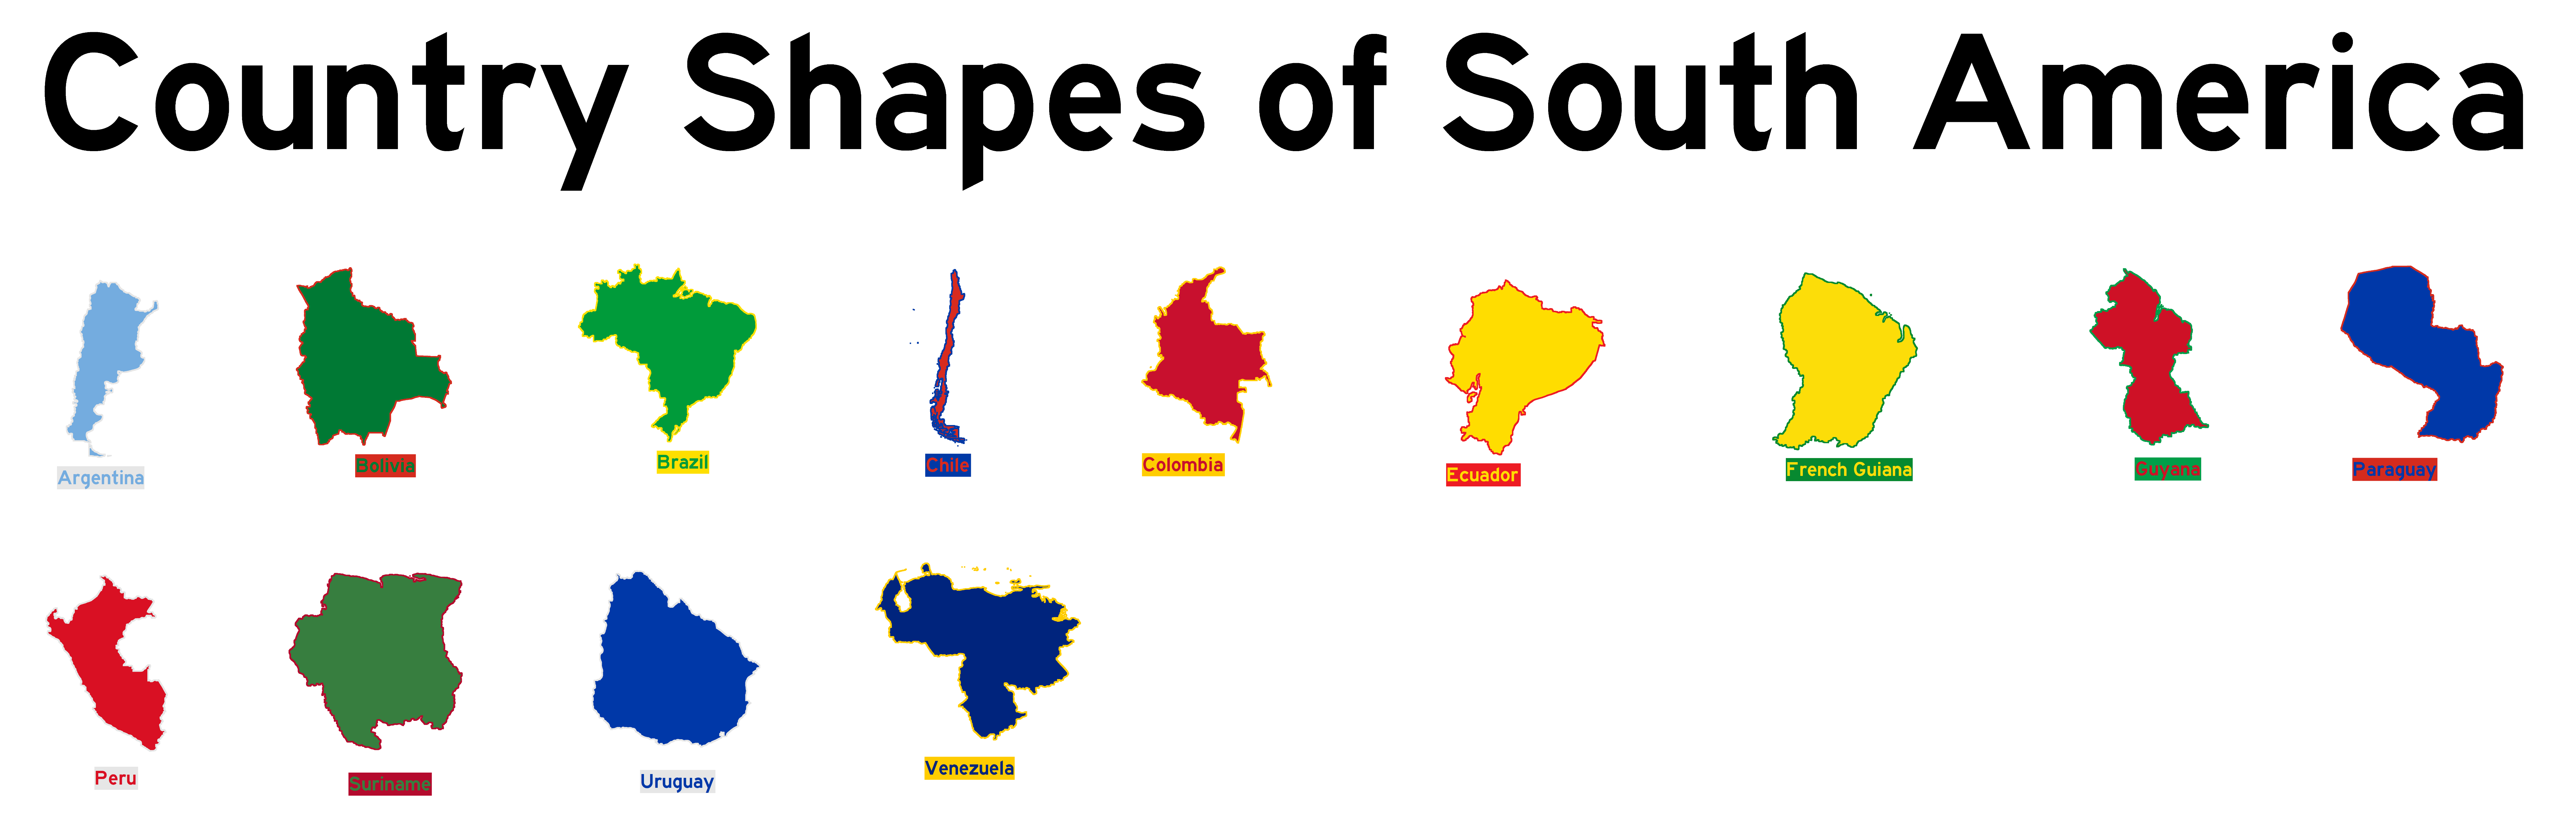 Country Shapes of South America (White Background) by